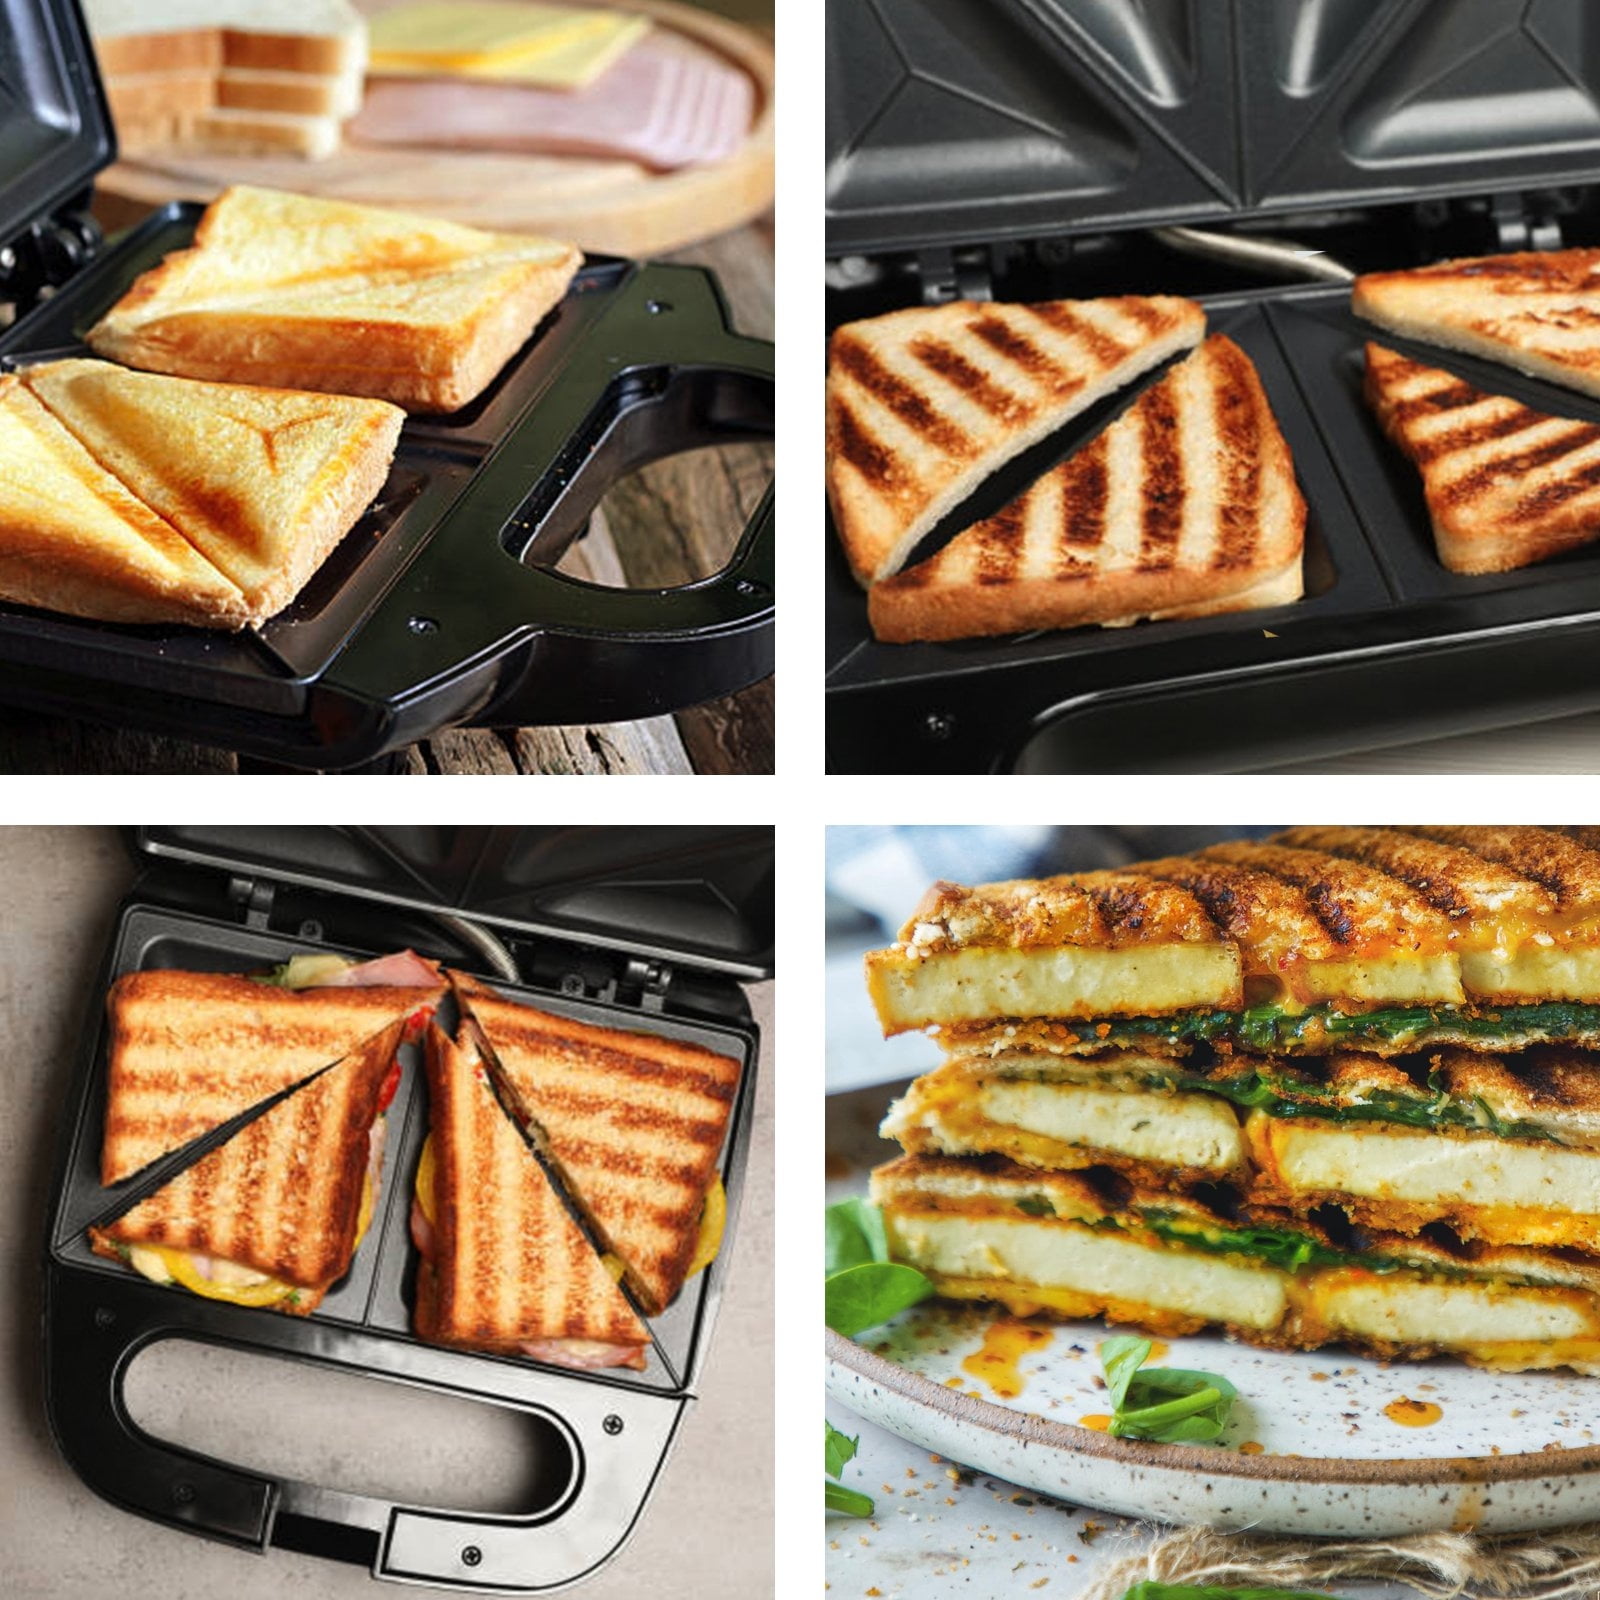 Non-Stick Beille Steel Sandwich Stainless Kitchen with Maker Toaster Cooking Plates